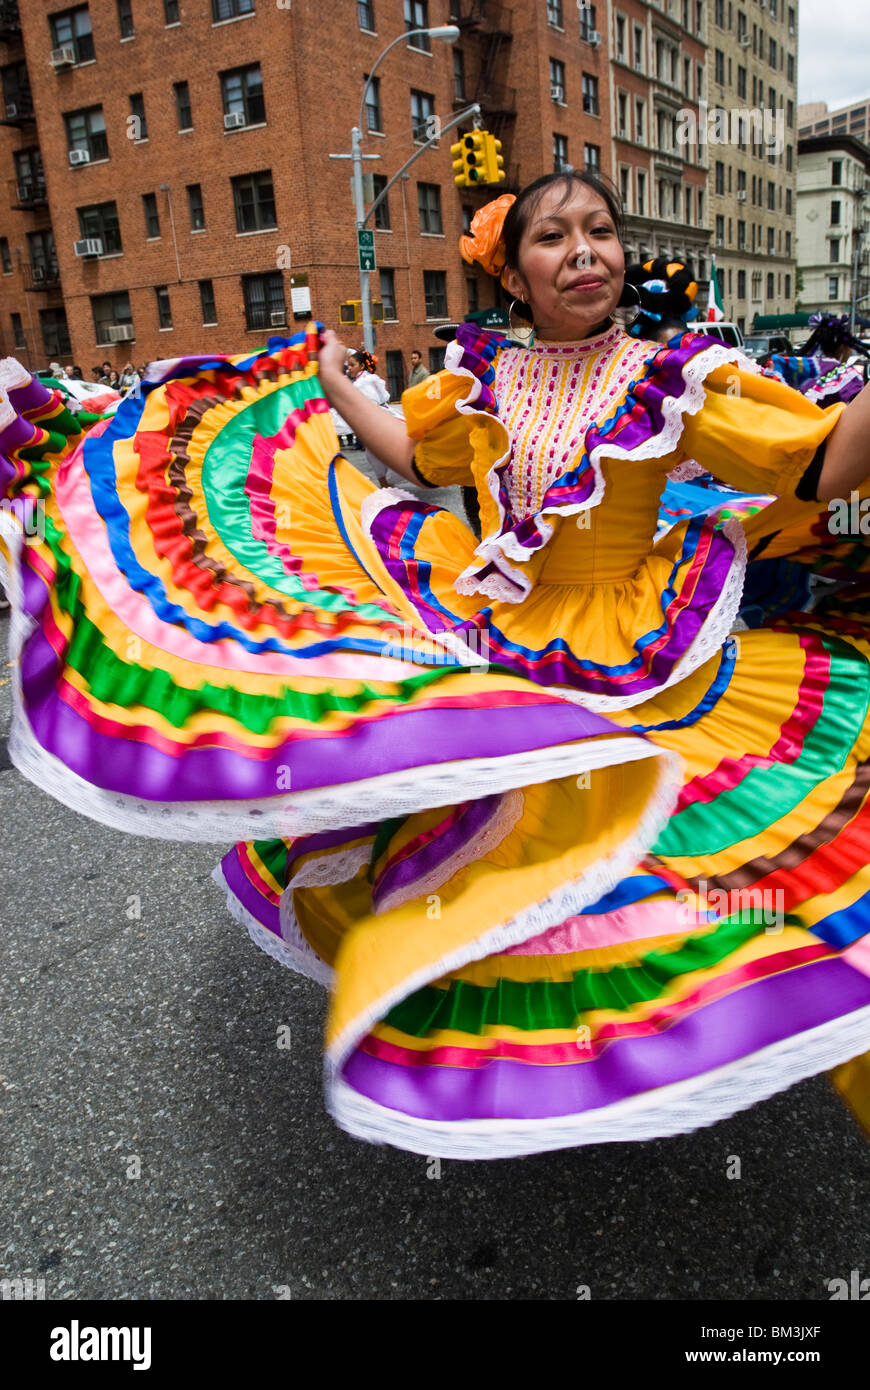 Performers in the Cinco de Mayo Parade in New York on Central Park West